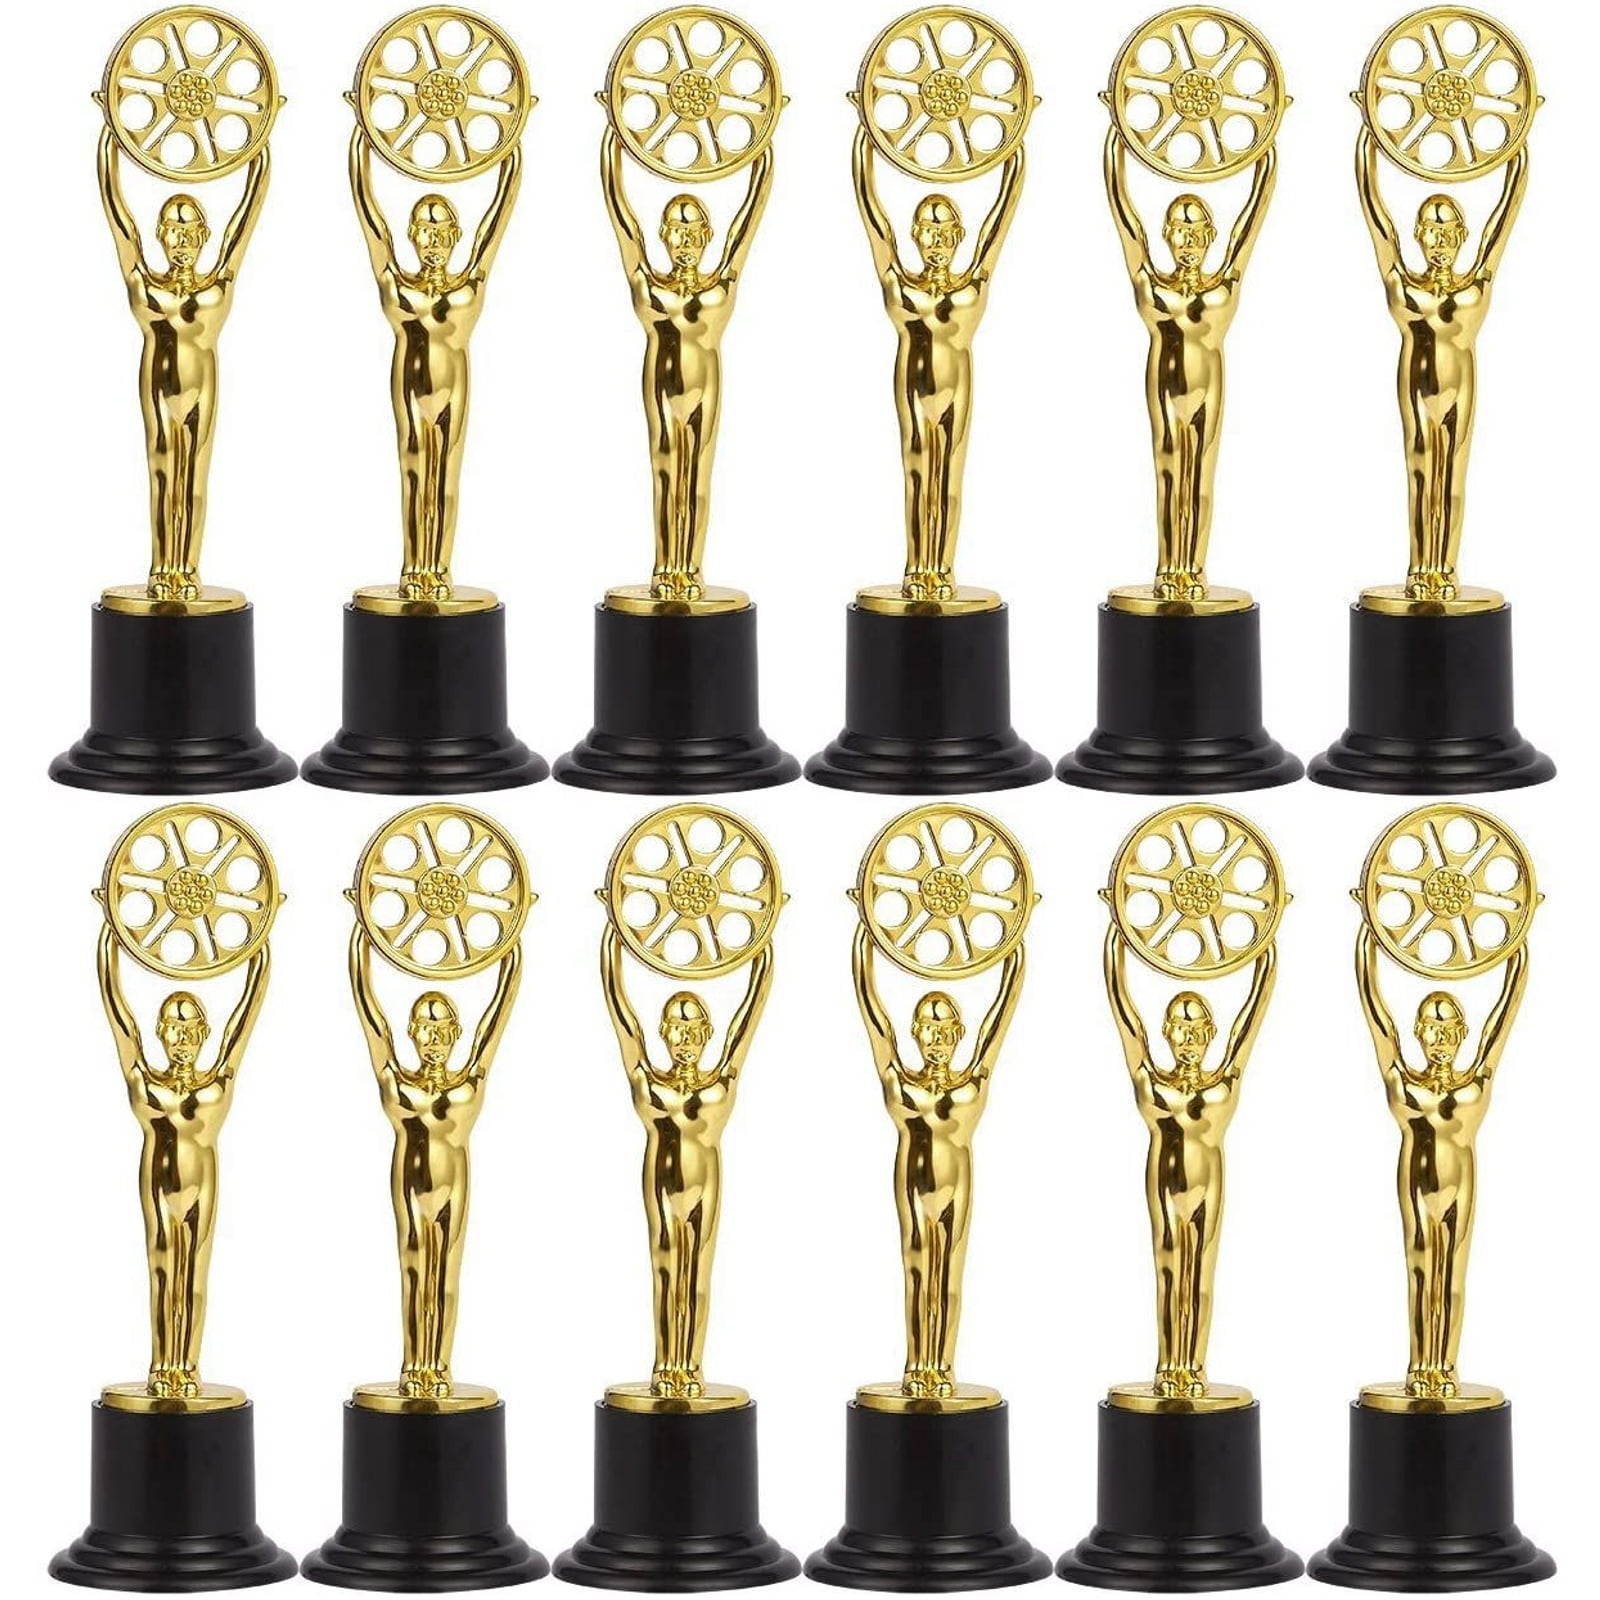 STAR GOLD CHILDS CHILDREN TROPHY ENGRAVED FREE CONGRATS MINI STAR TROPHIES 